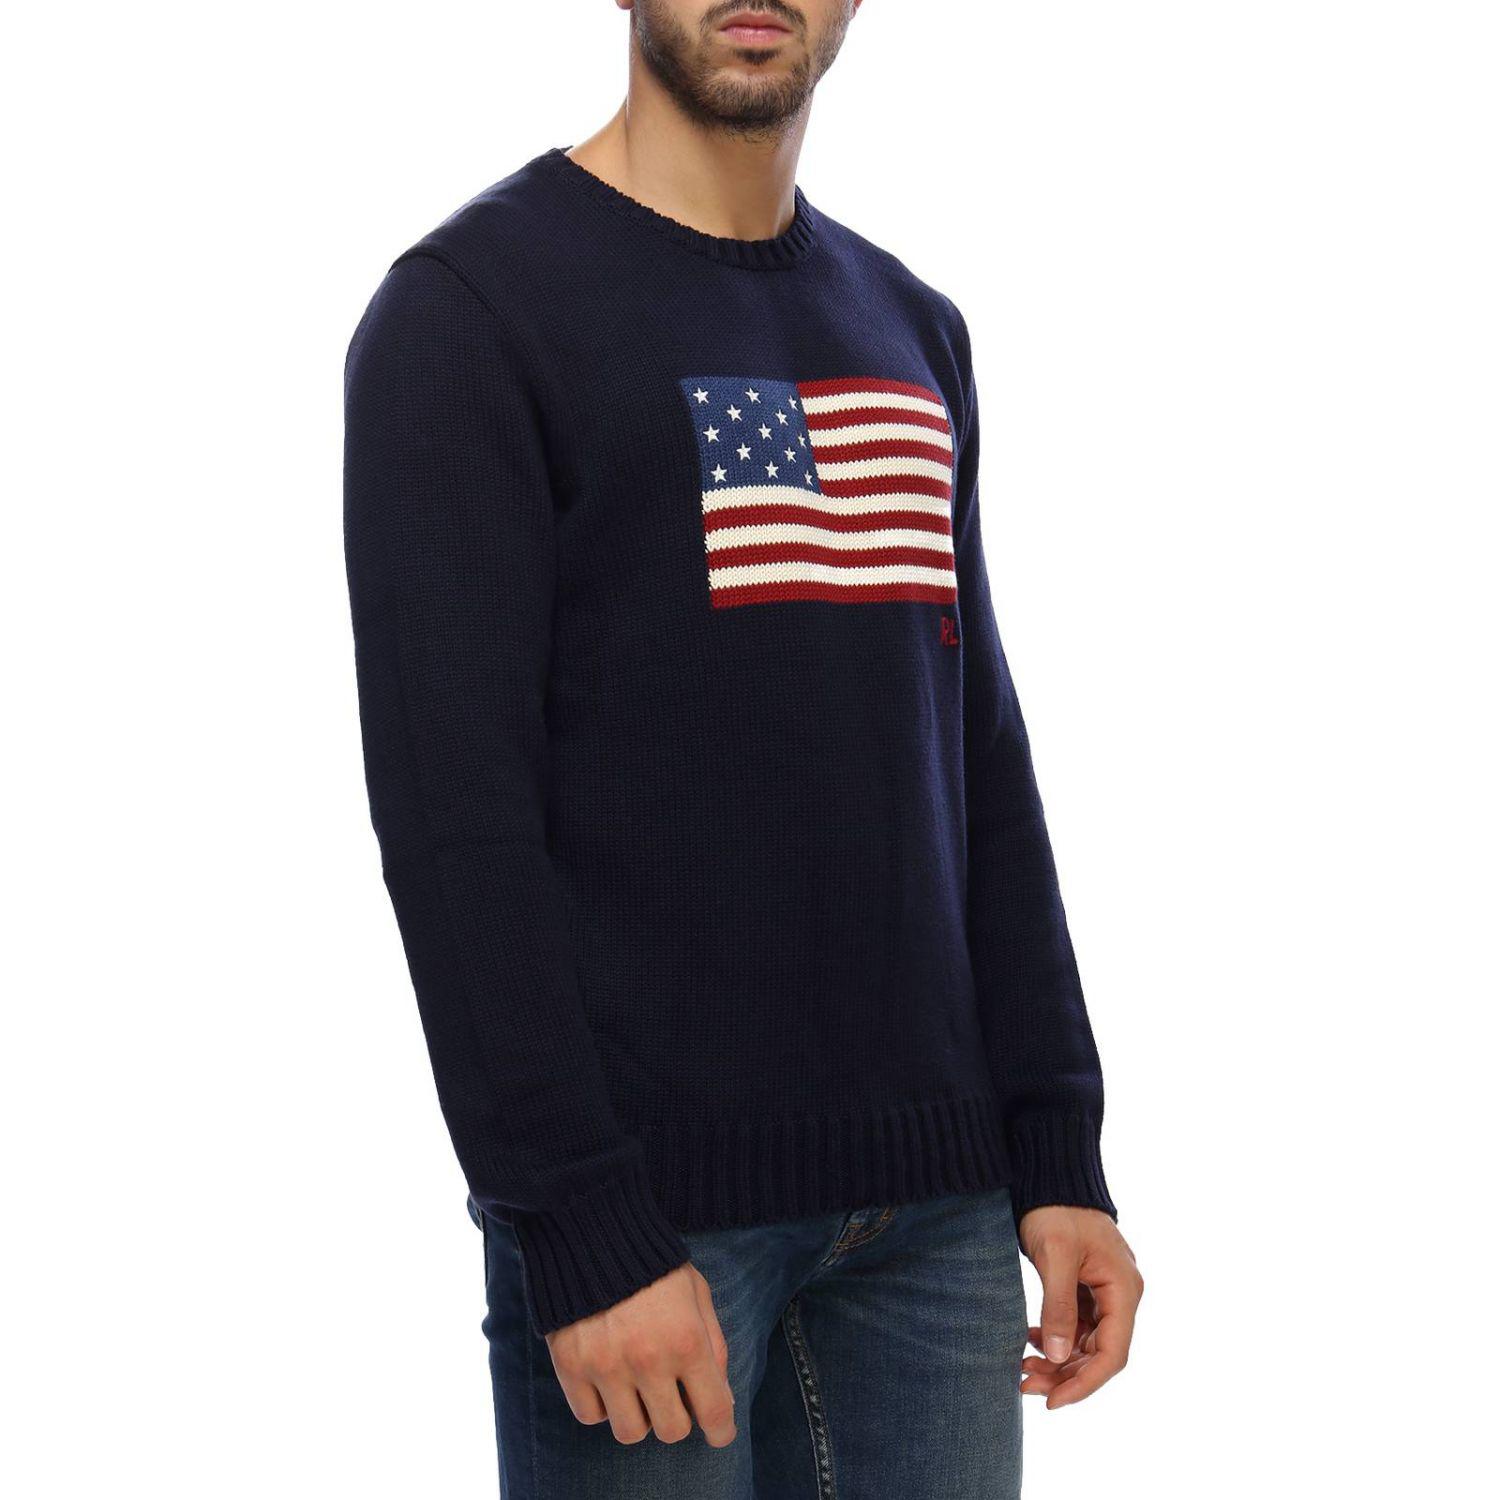 Polo Ralph Lauren Cotton Ralph Lauren The Iconic Flag Sweater in Beige  (Blue) for Men - Save 76% | Lyst UK